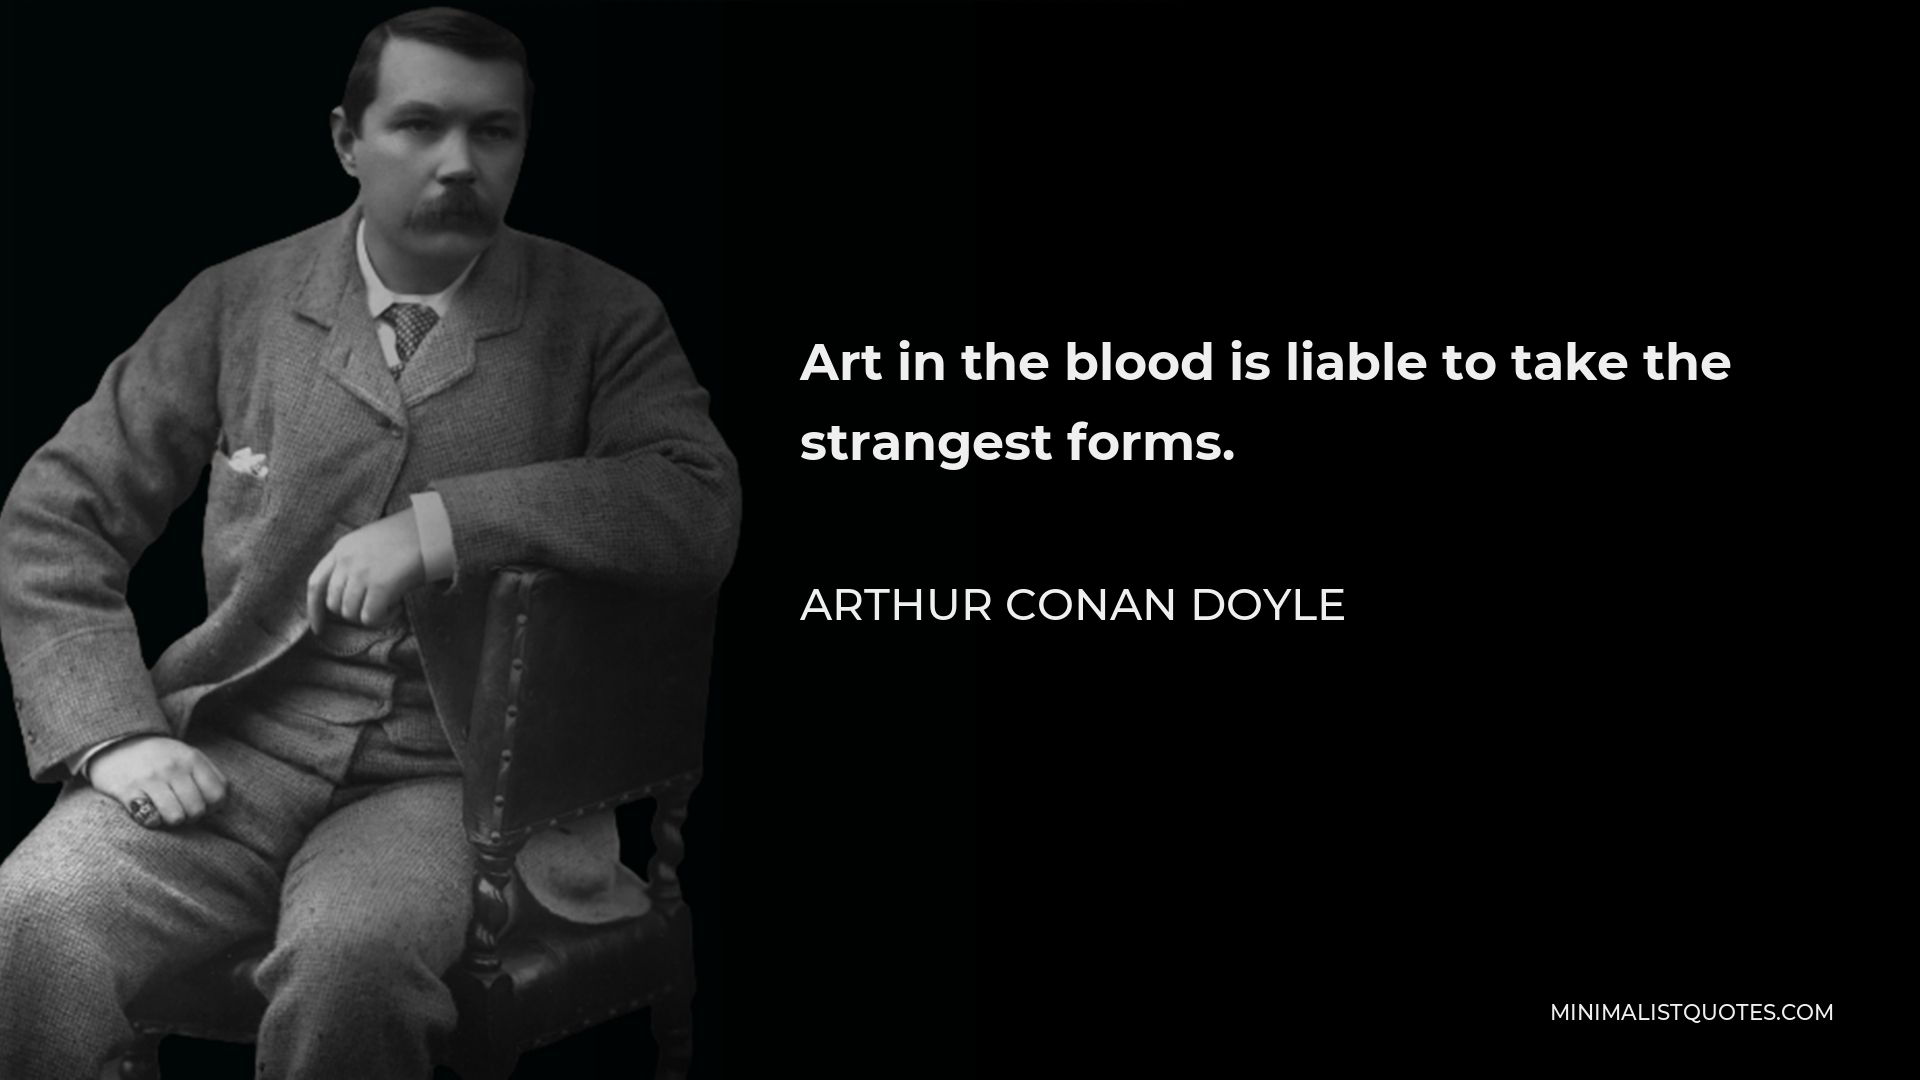 Arthur Conan Doyle Quote - Art in the blood is liable to take the strangest forms.